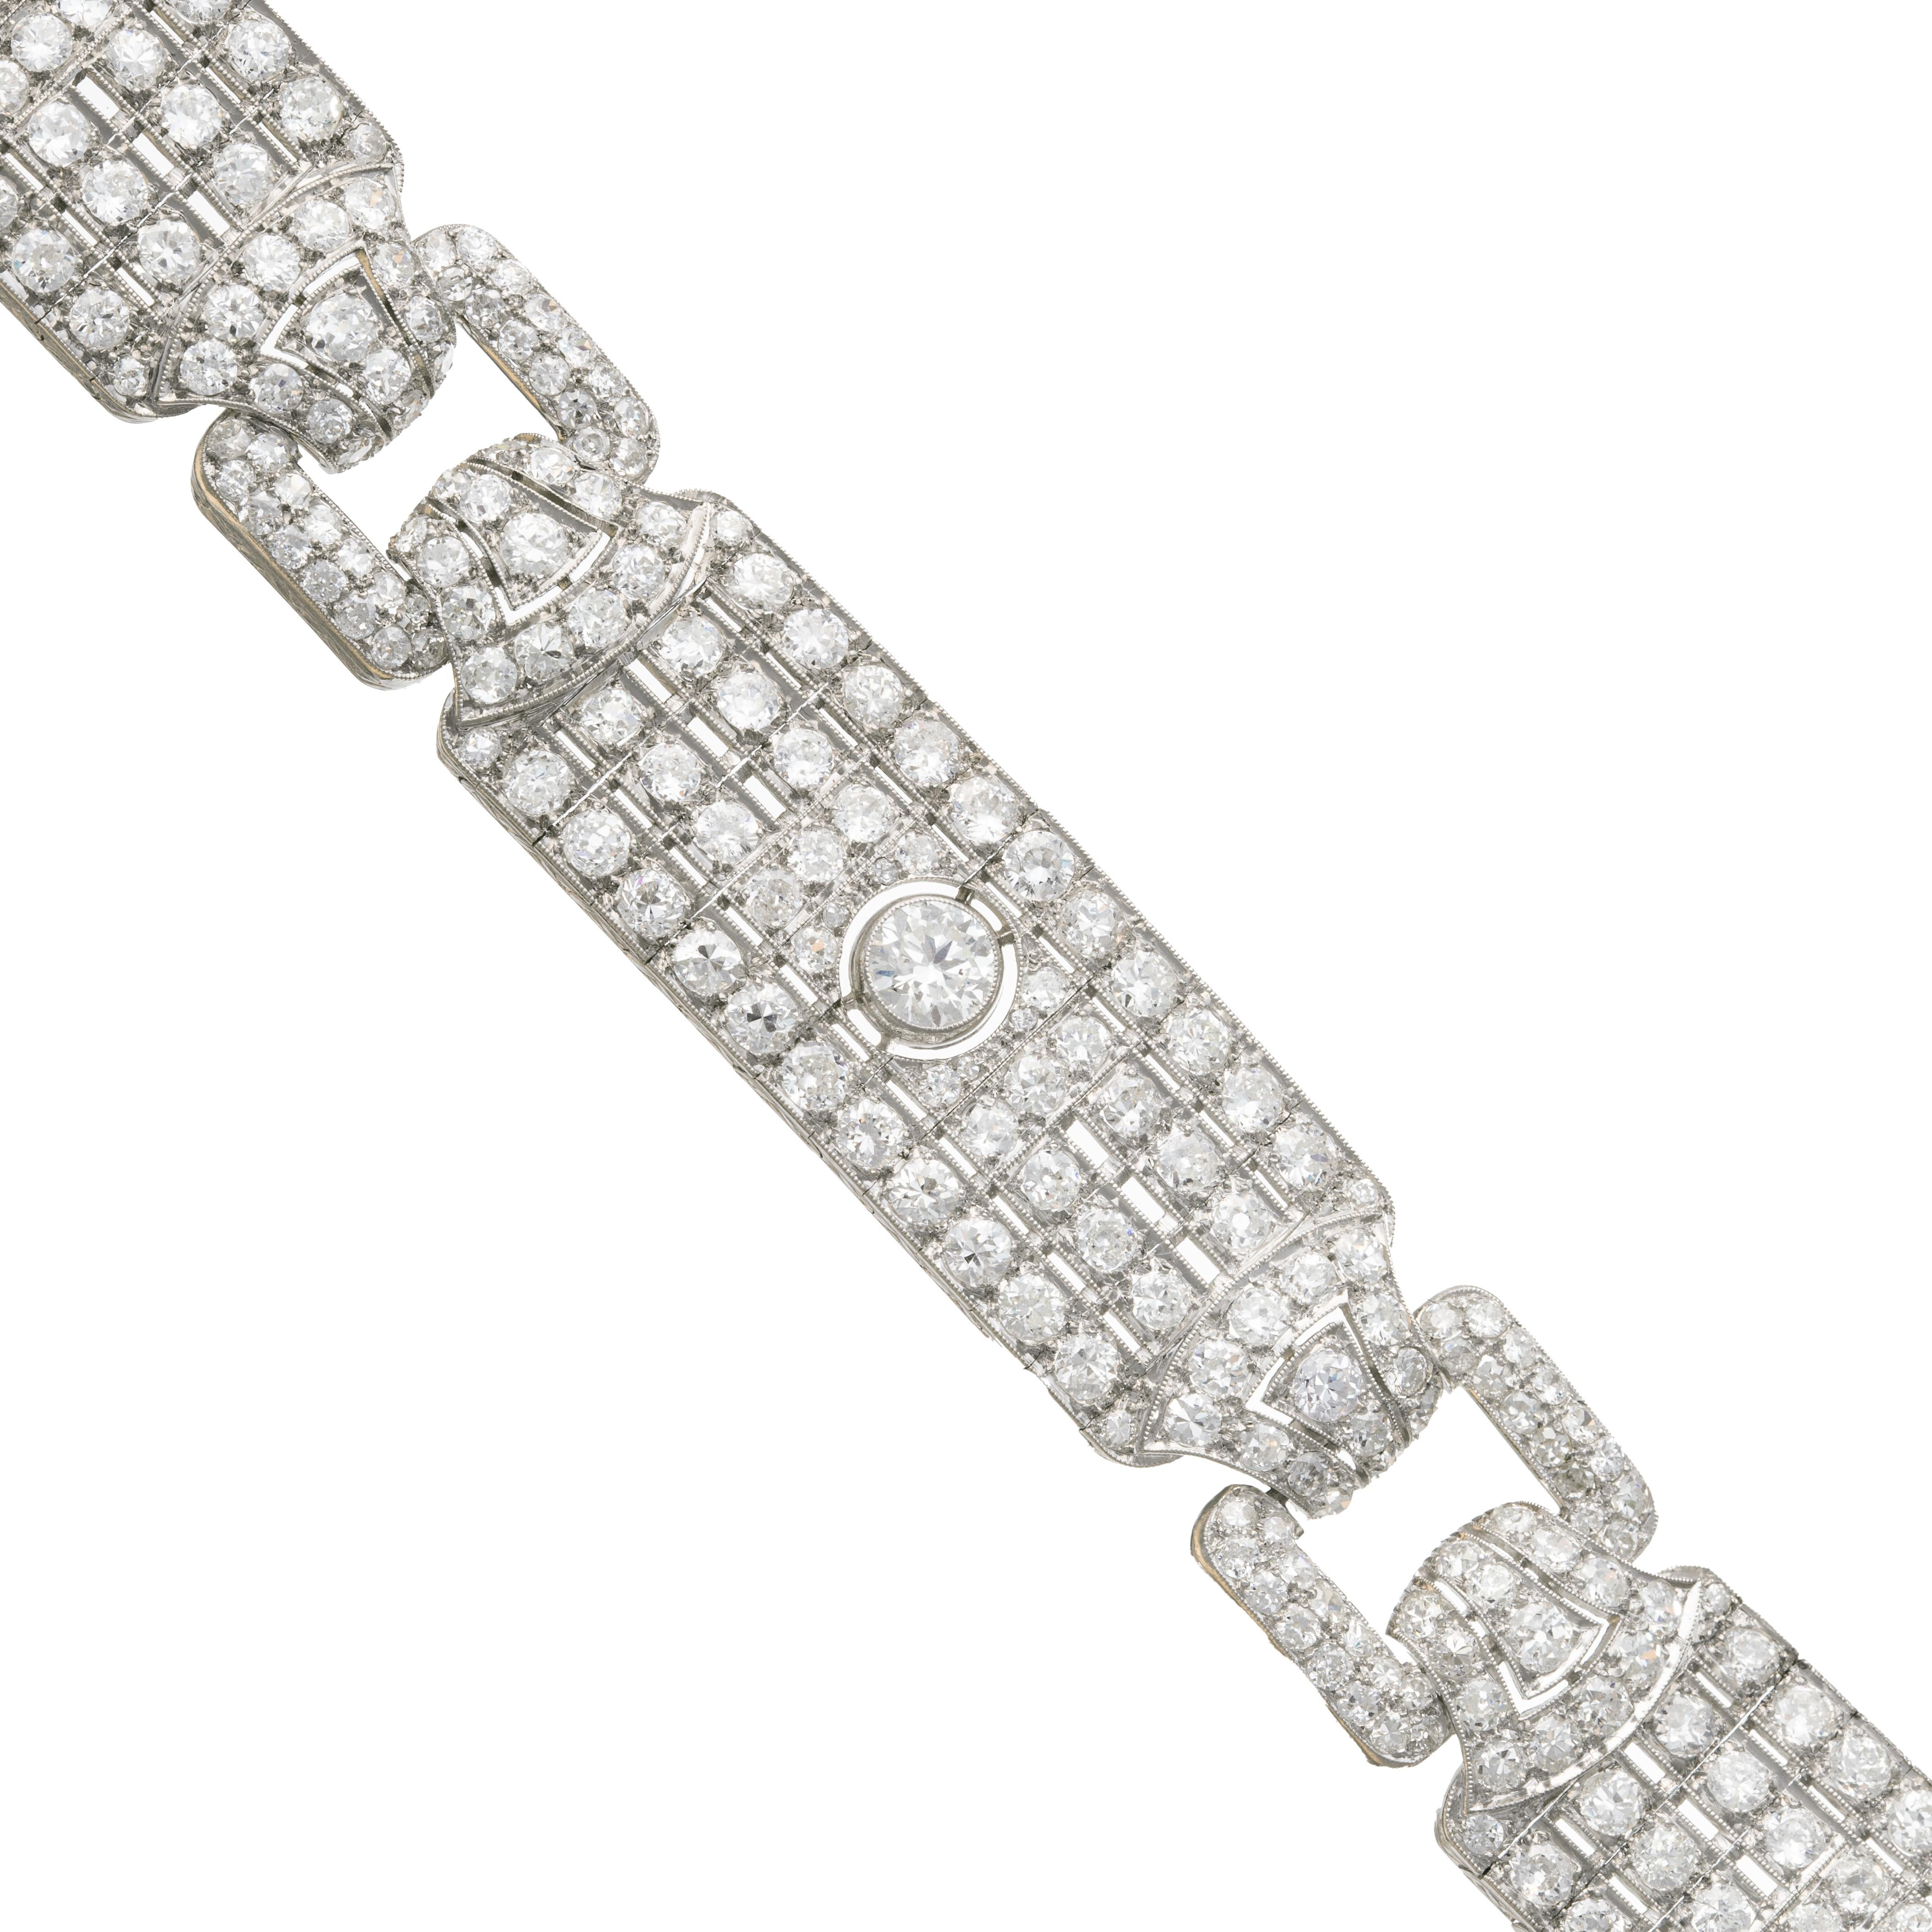 Fine handmade platinum panel link bracelet, comprised of three sections each with a central bezel set old European cut diamond and a buckle motif in between each panel.  Decorated with over three hundred eighteen European and single-cut diamonds